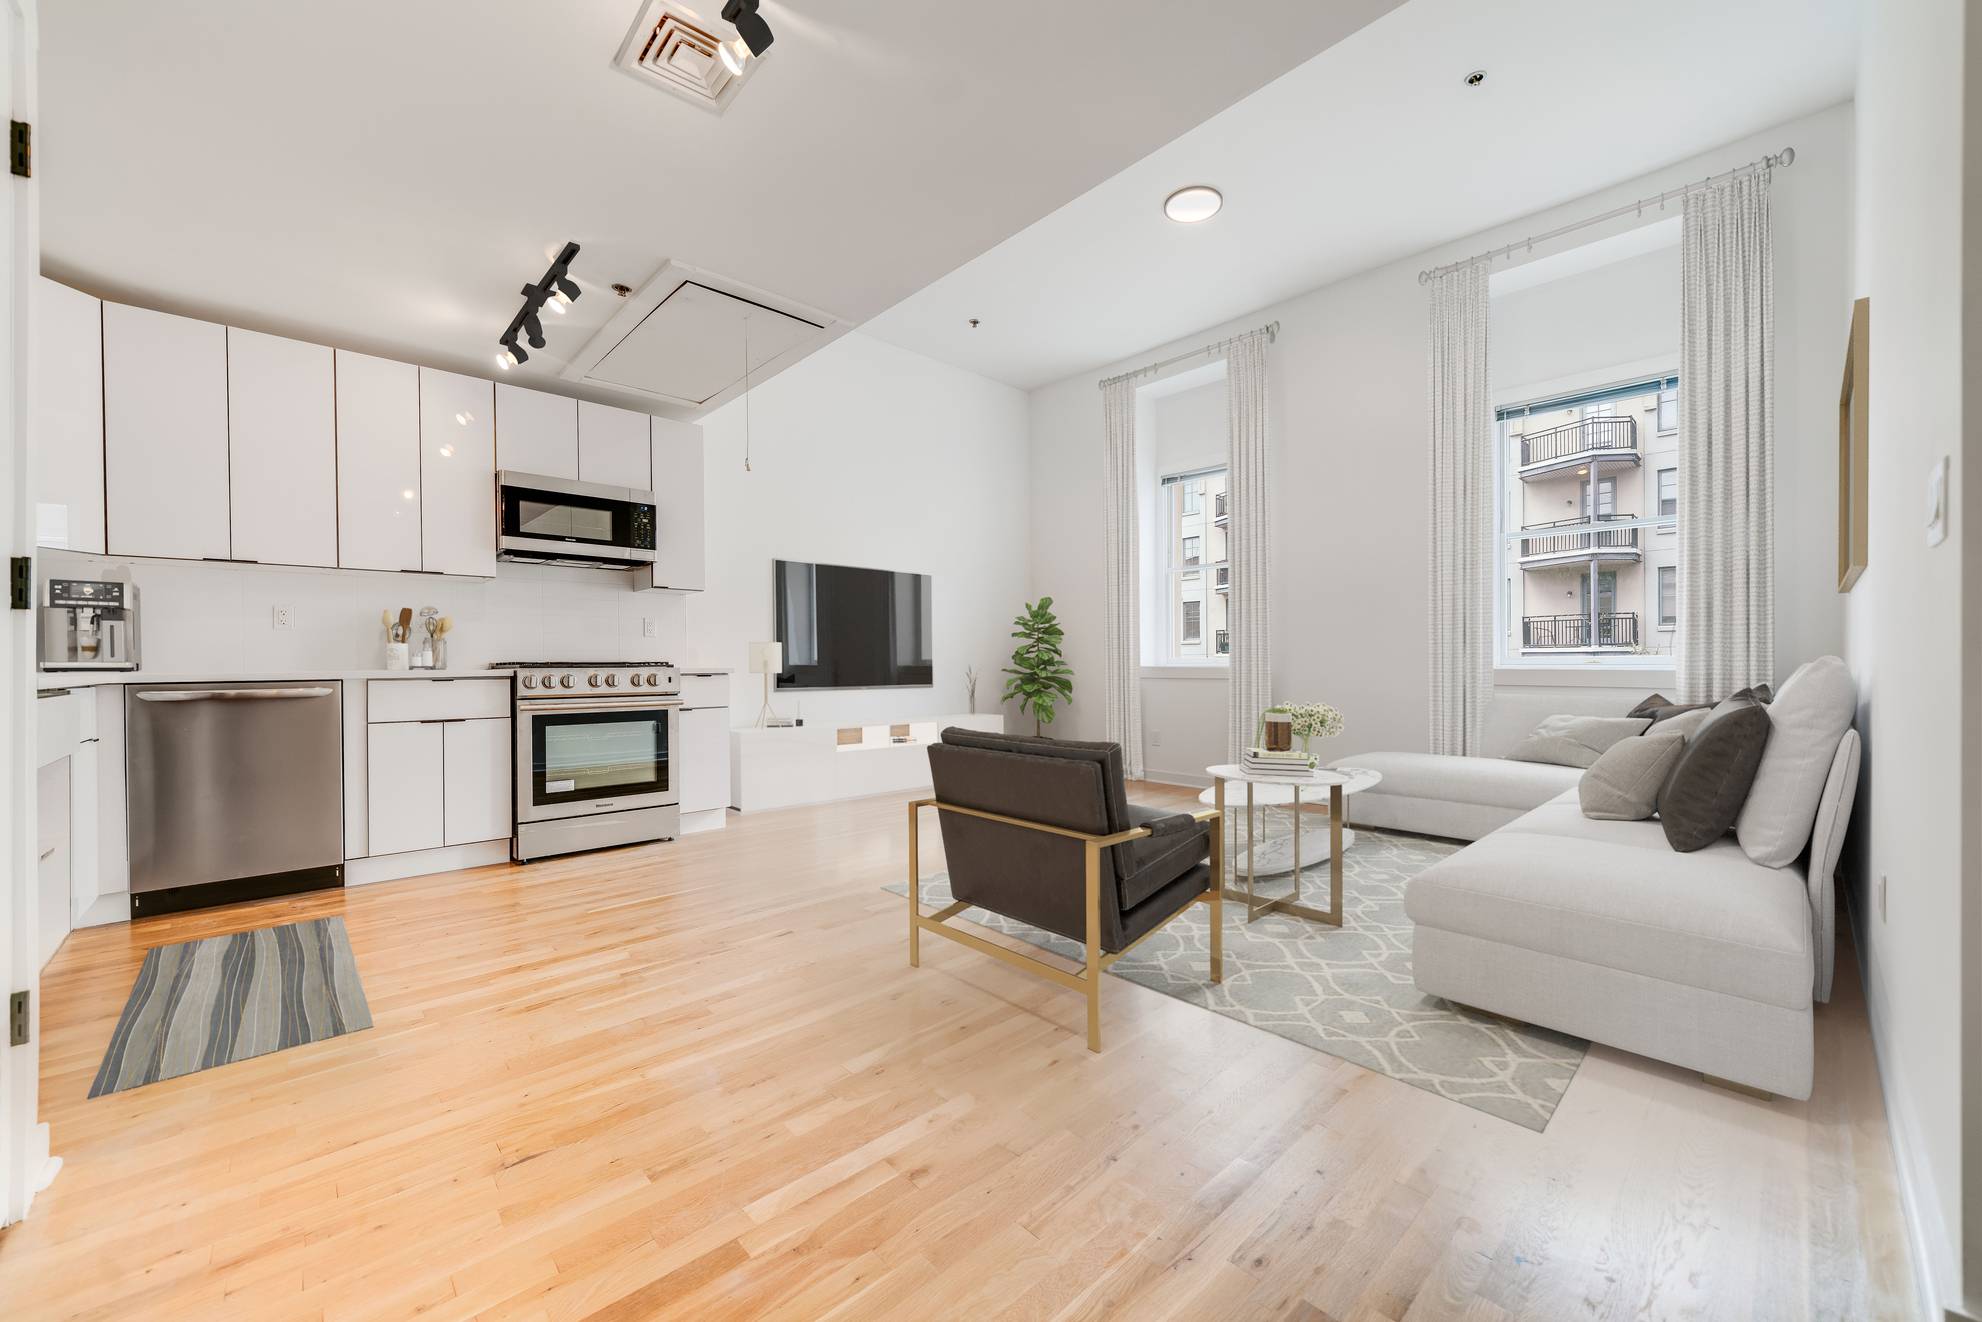 3 Stunning 1 Bedroom homes located at 716 Madison Street in Hoboken, NJ!  Newly Renovated! Close to NJ Lightrail Station as well as NYC Bus Stops! Elevator on Site and Parking!  Laundry in Unit!  No Fees!